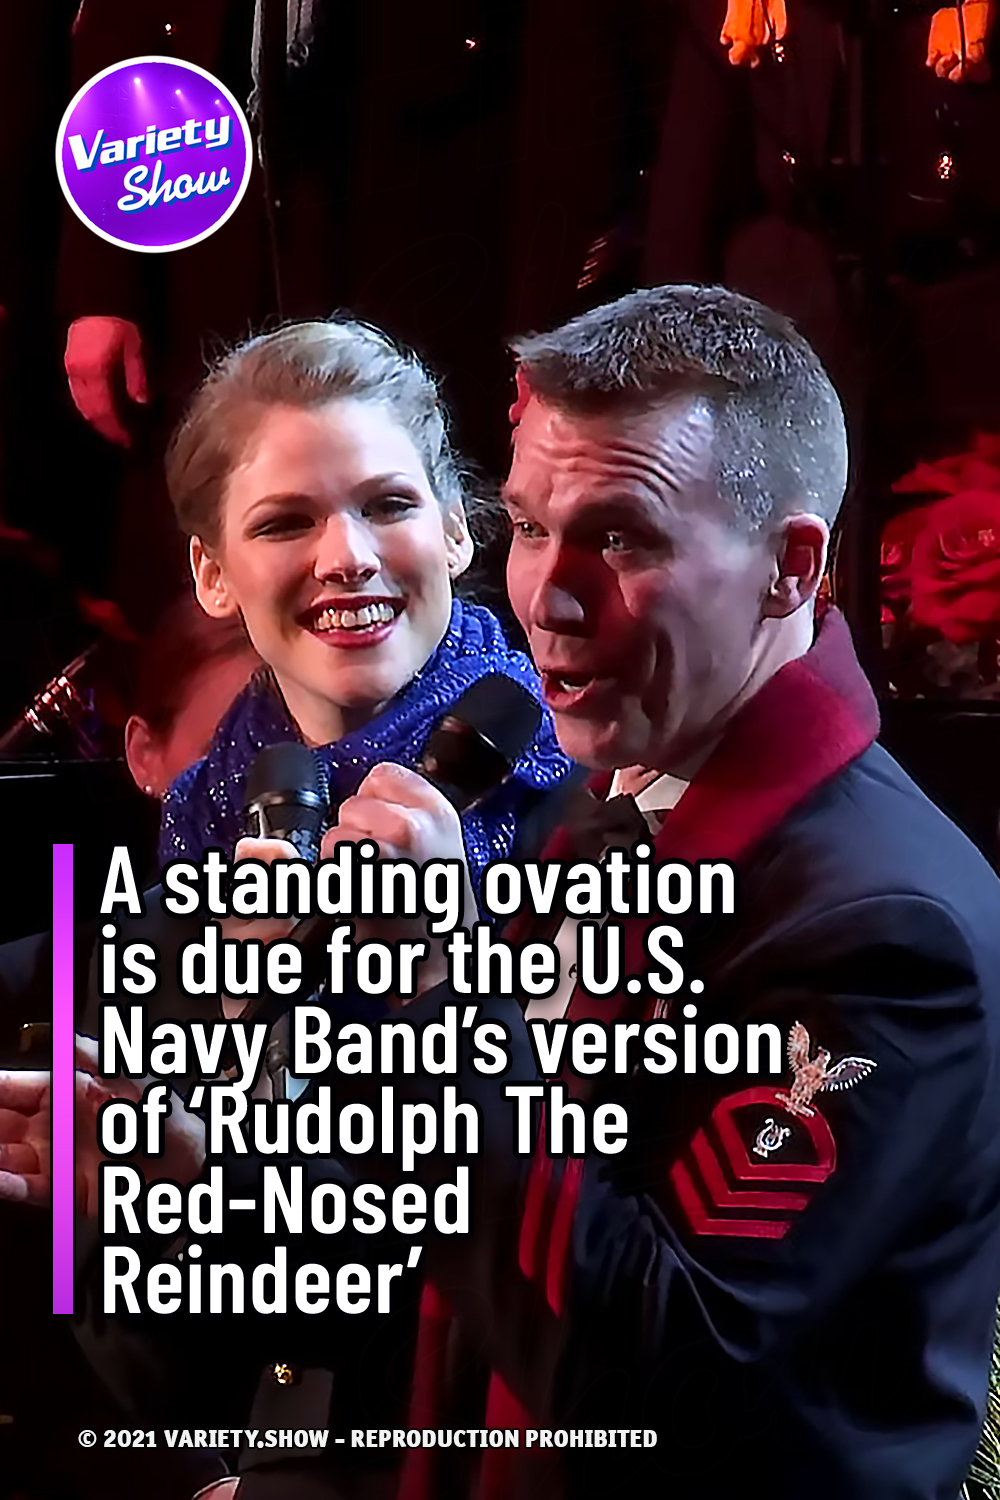 A standing ovation is due for the U.S. Navy Band’s version of ‘Rudolph The Red-Nosed Reindeer’